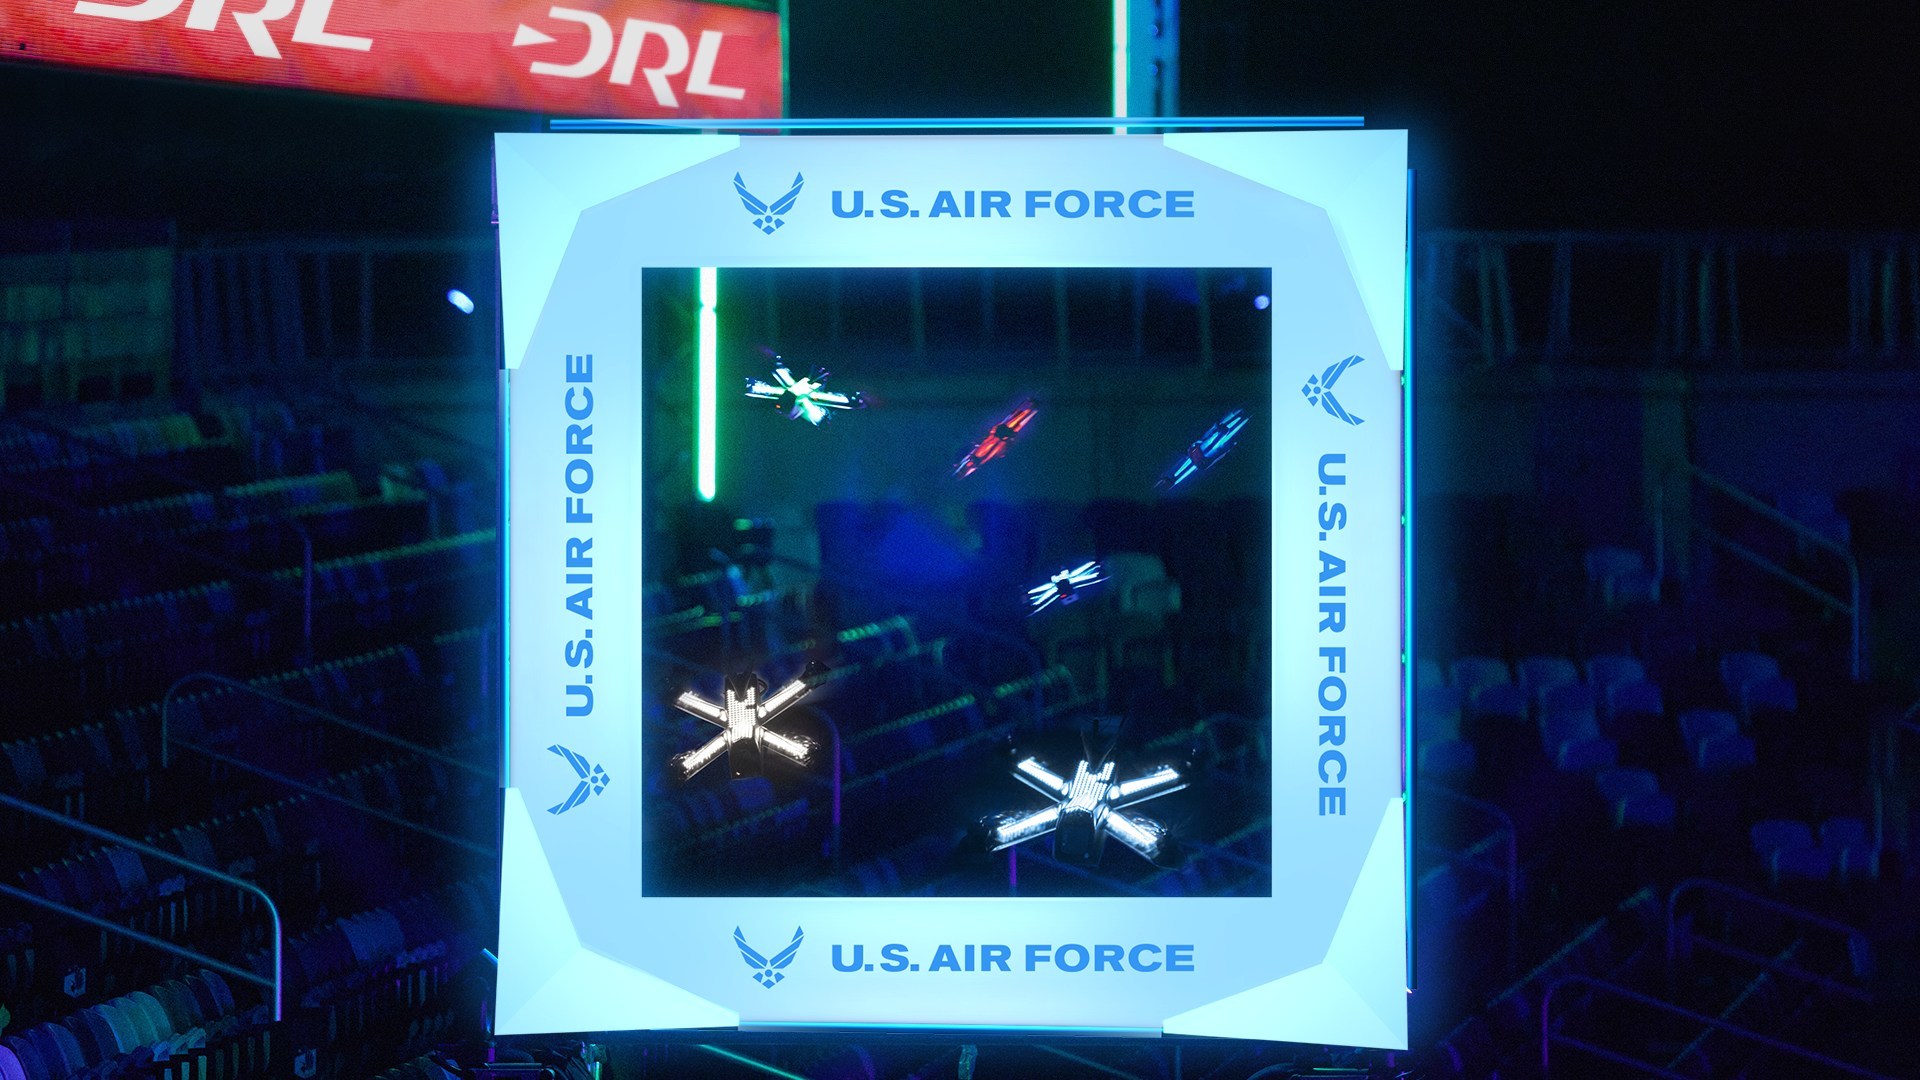 The United States Air Force Renews and Extends Partnership with the Drone Racing League to Celebrate 75 Years of Innovation